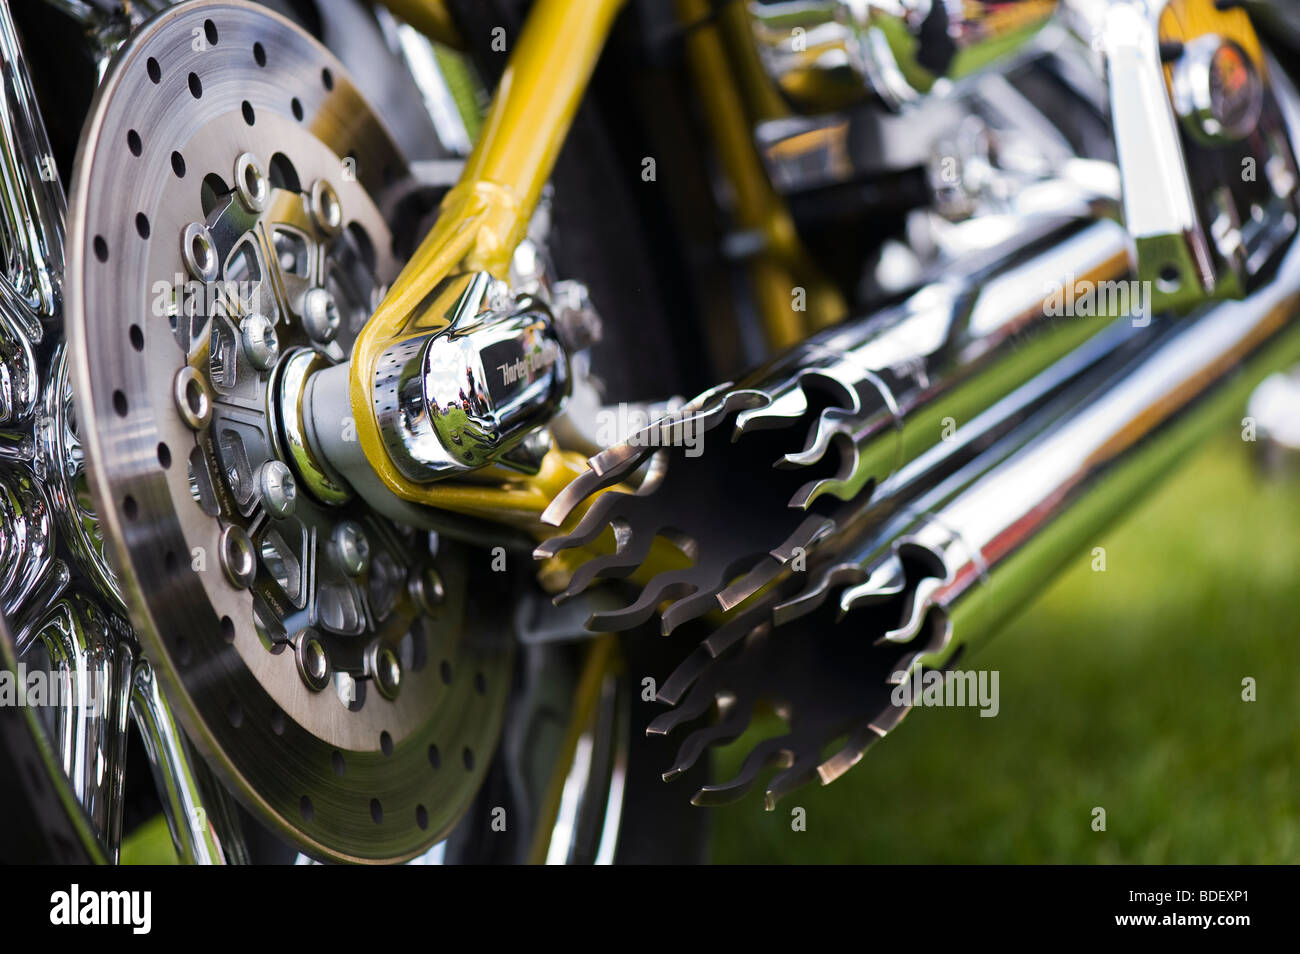 Harley Davidson motorcycle chrome flame exhaust pipes Stock Photo - Alamy